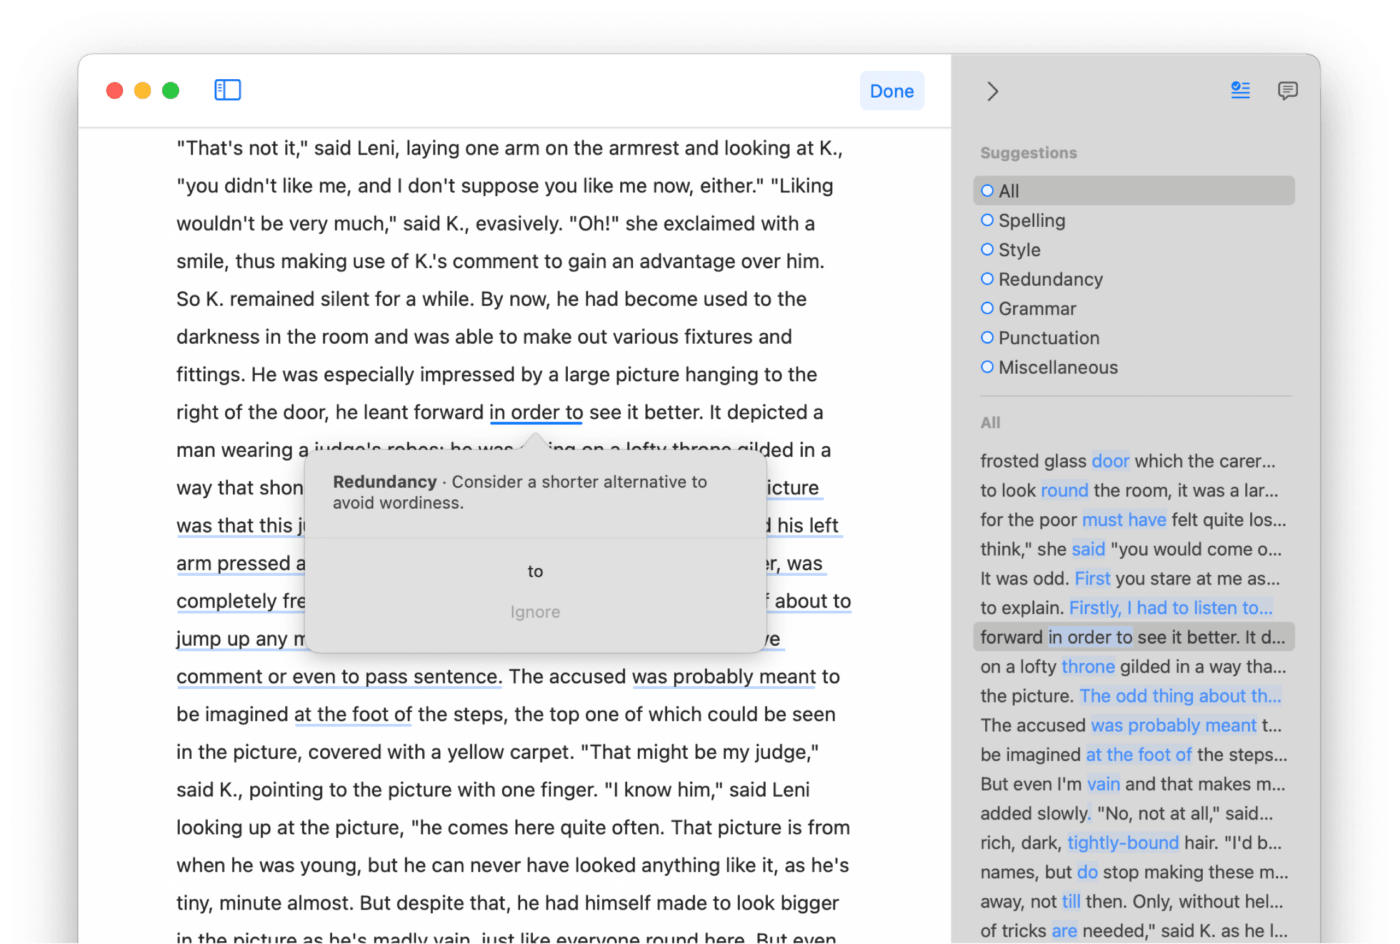 Ulysses text editor and proofreader